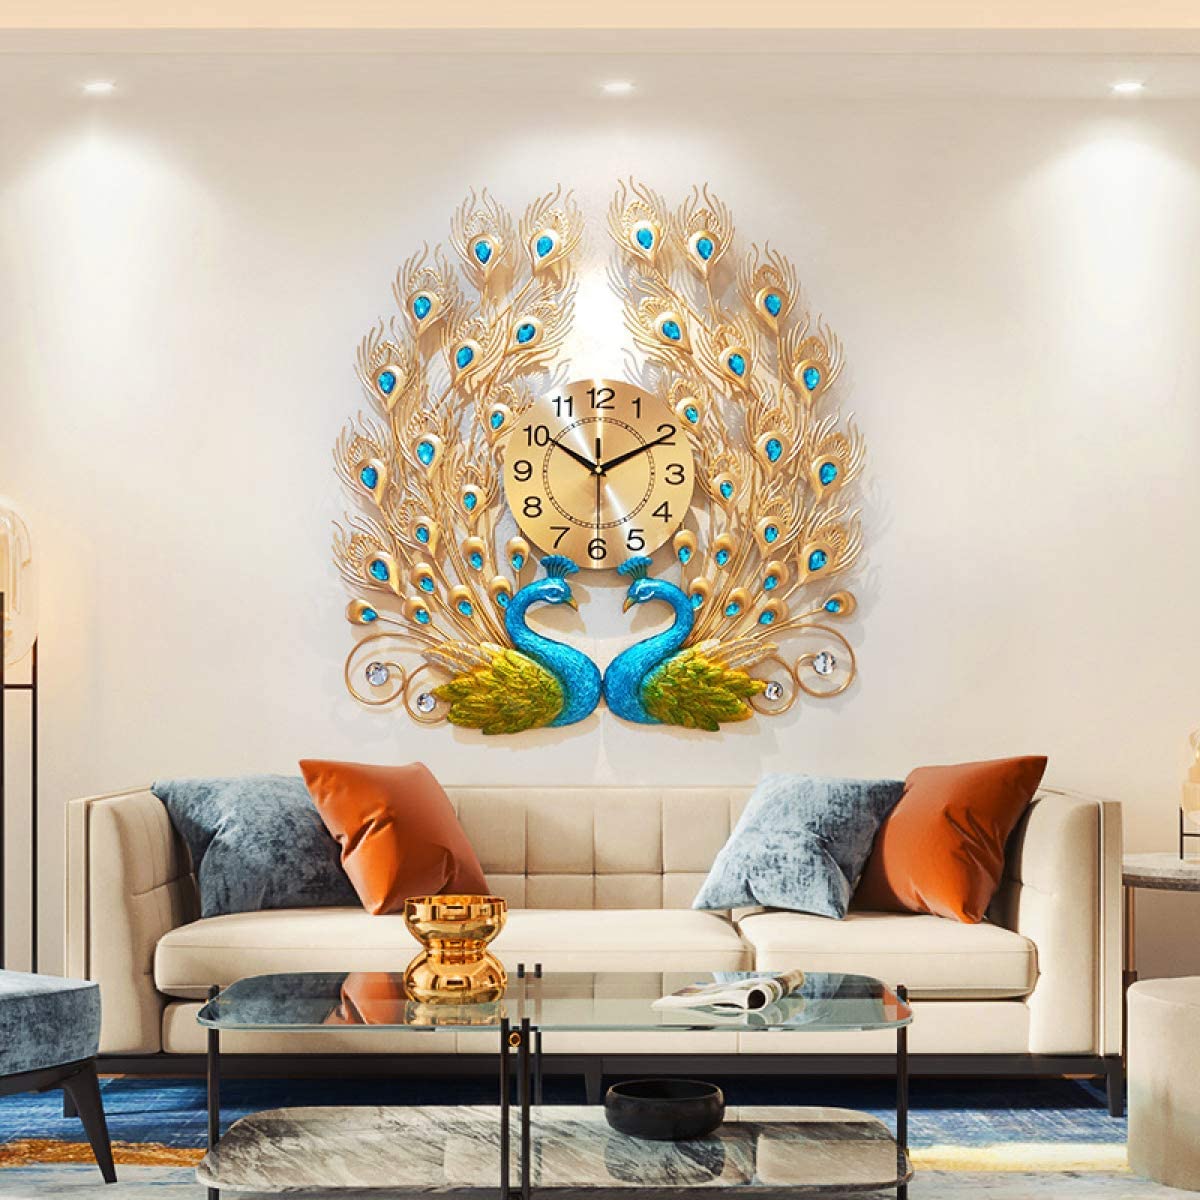 Wall-Clock.-2 +110 Unique Living Room Furniture Pieces That Amaze Everyone